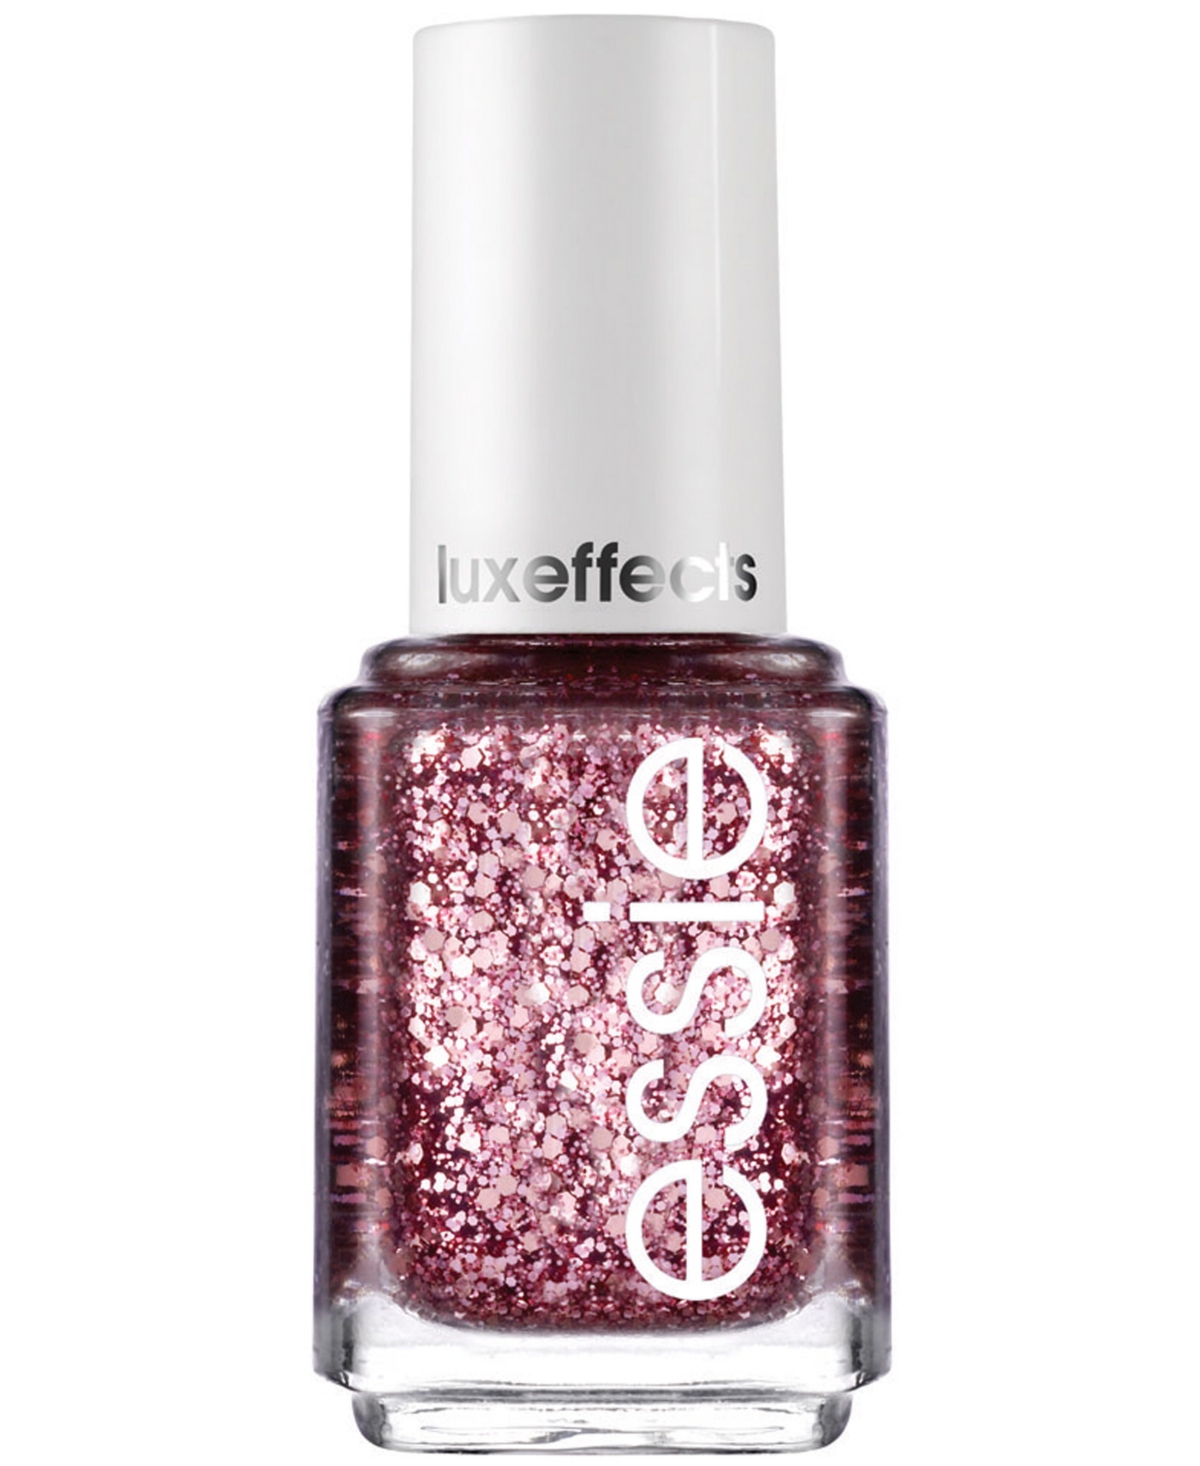 Luxeffects Nail Color - Set In Stones